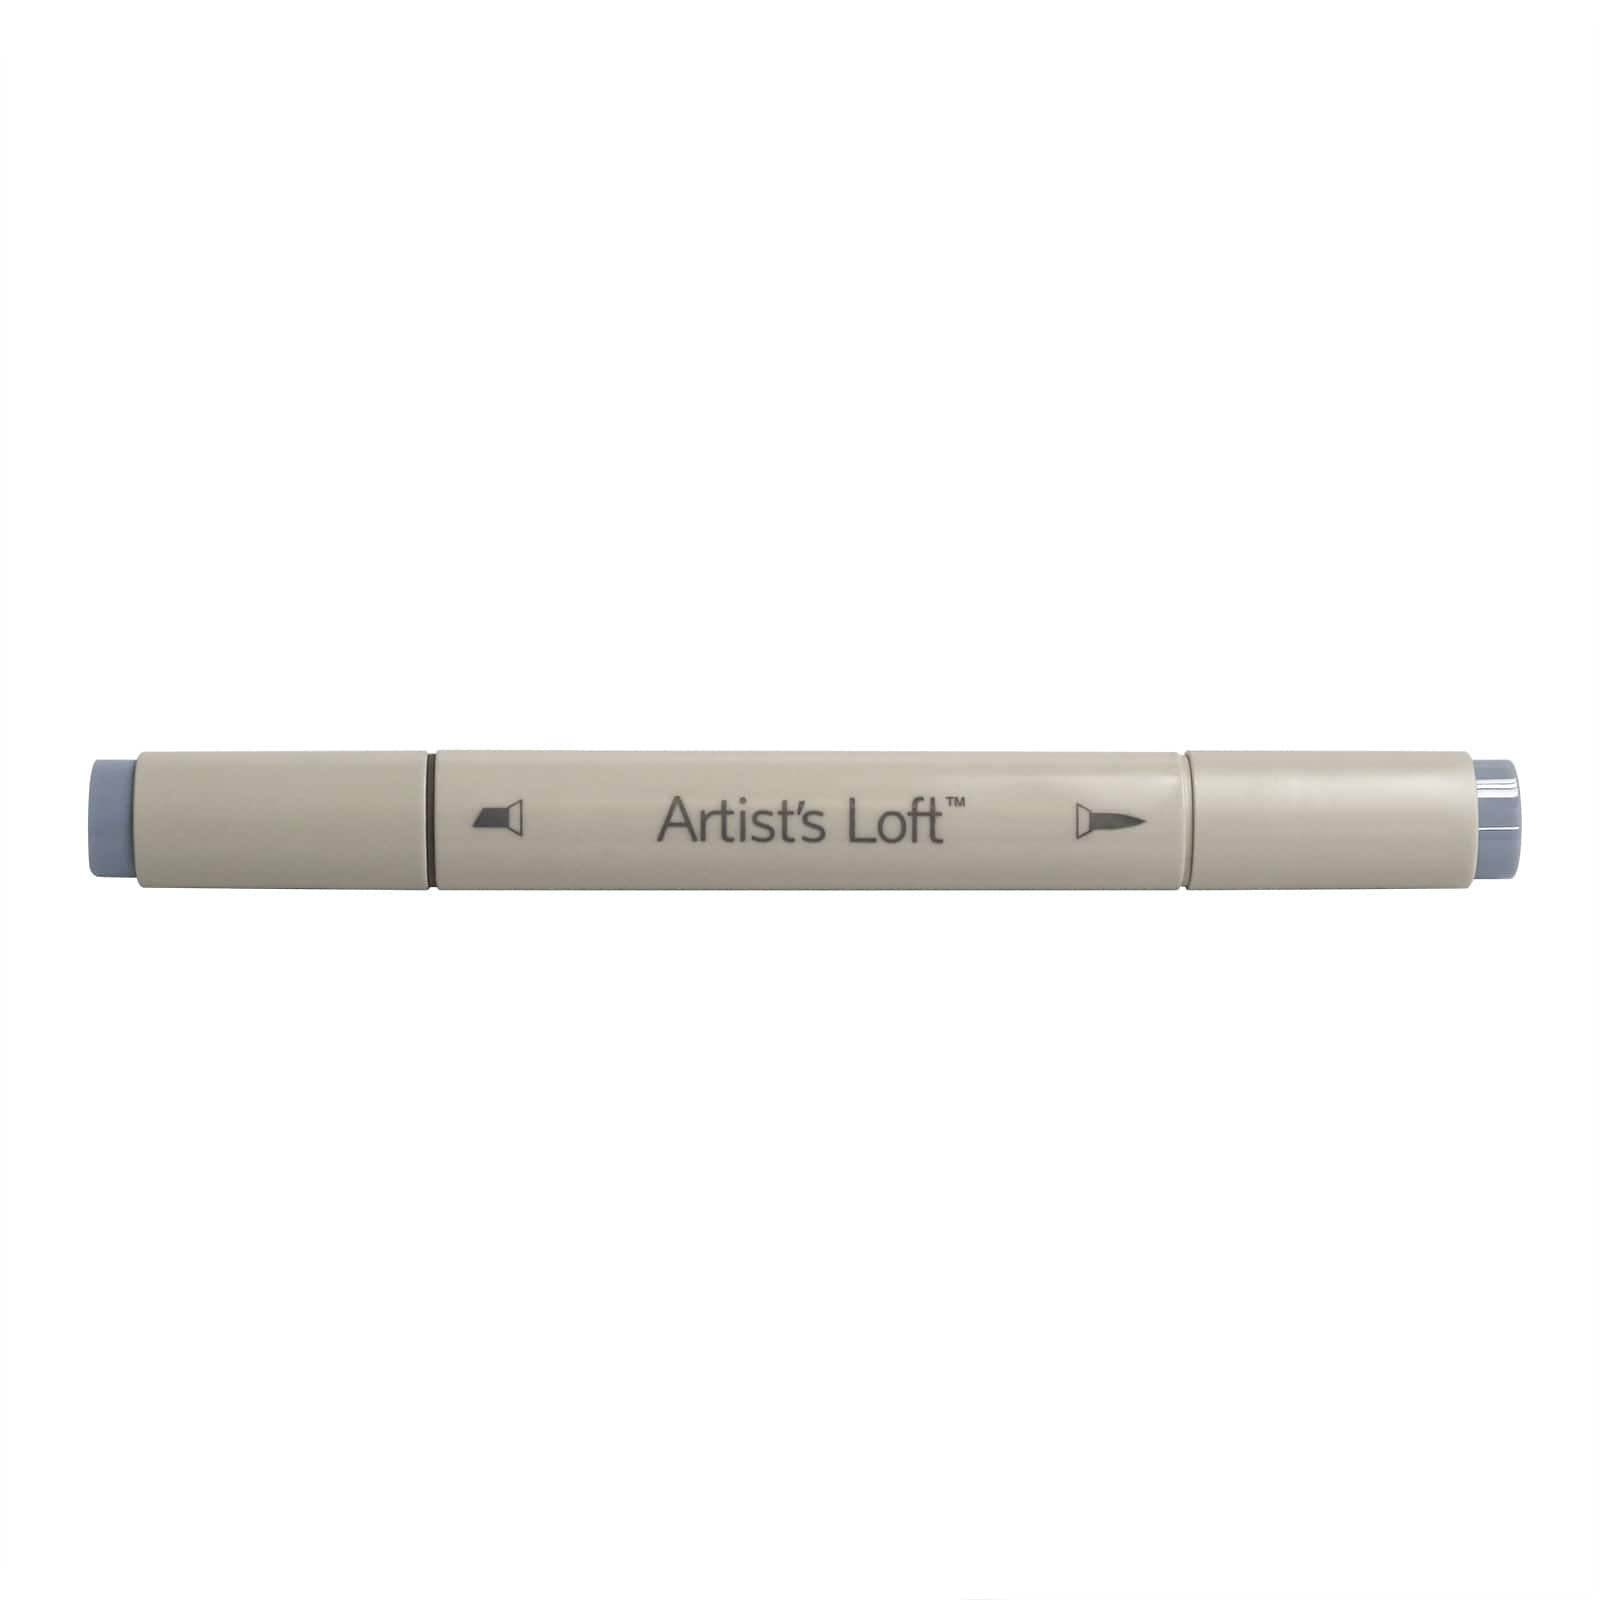 Crafter's Closet Artist's Premium Dual Tip Markers, Thick and Thin